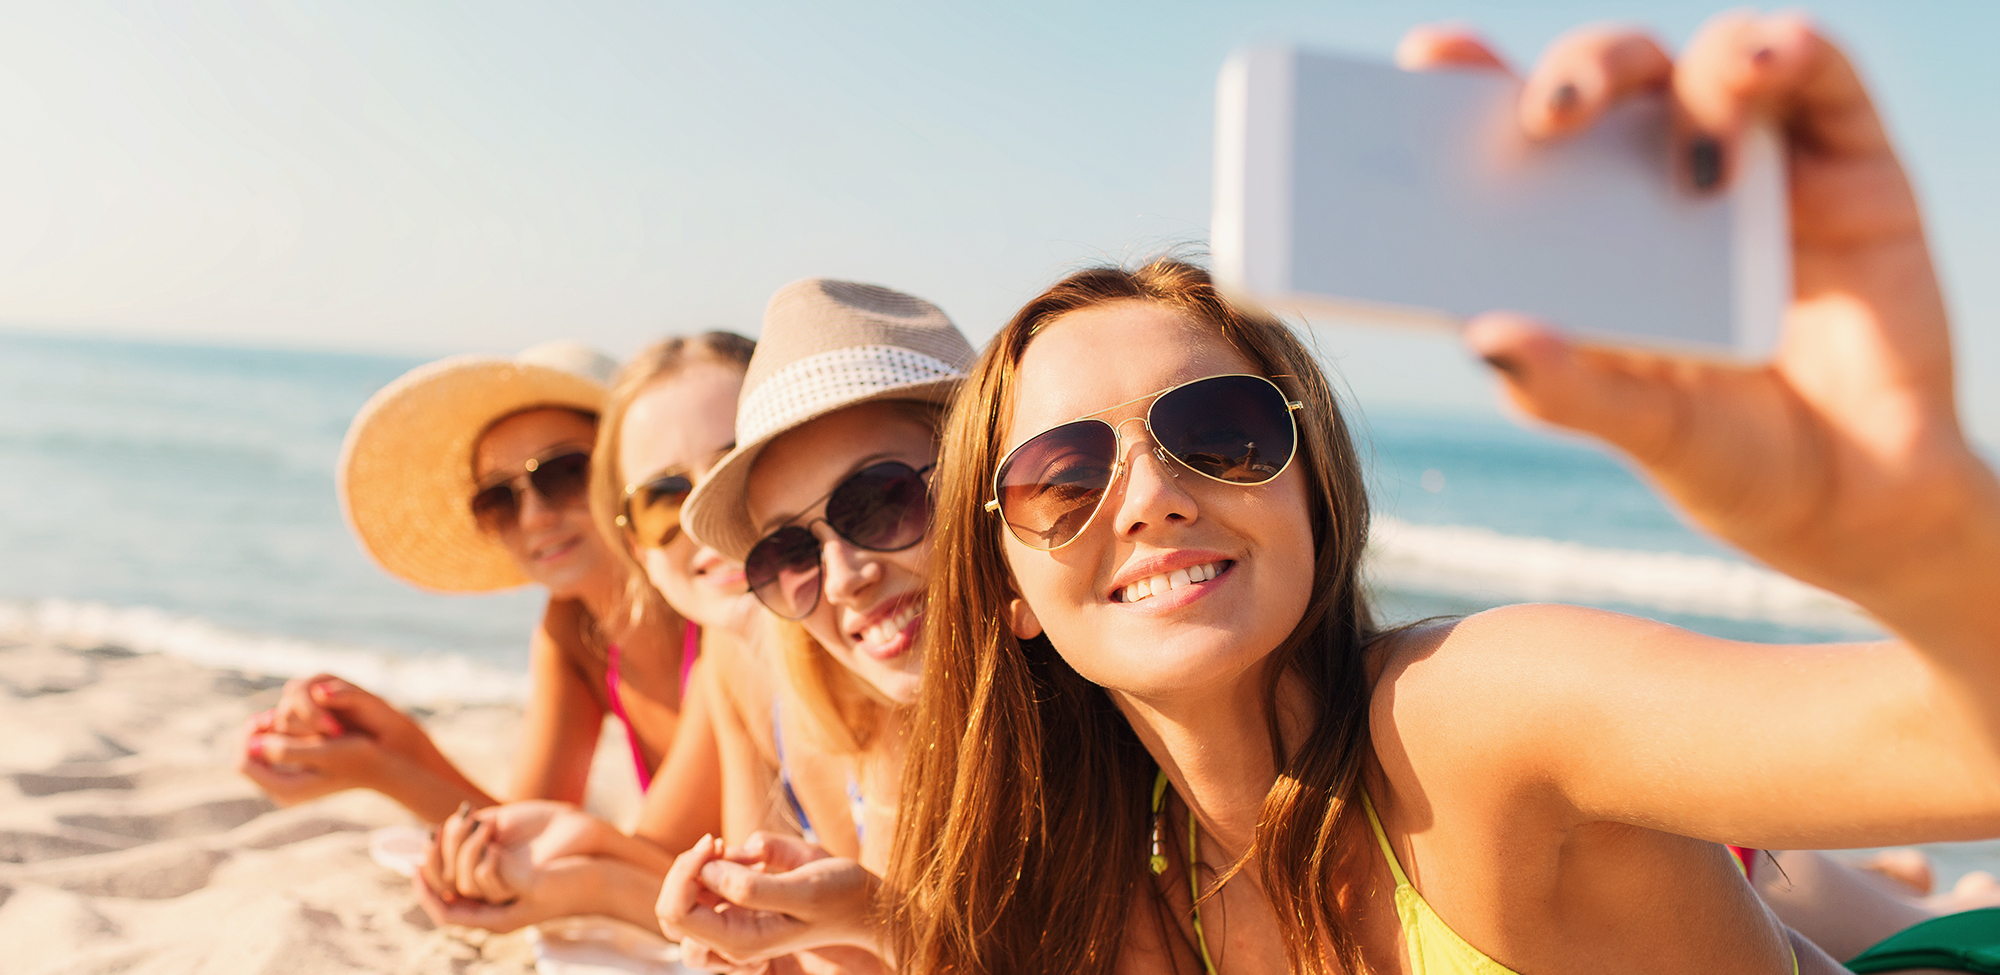 4 Tips for Your Summer with Braces